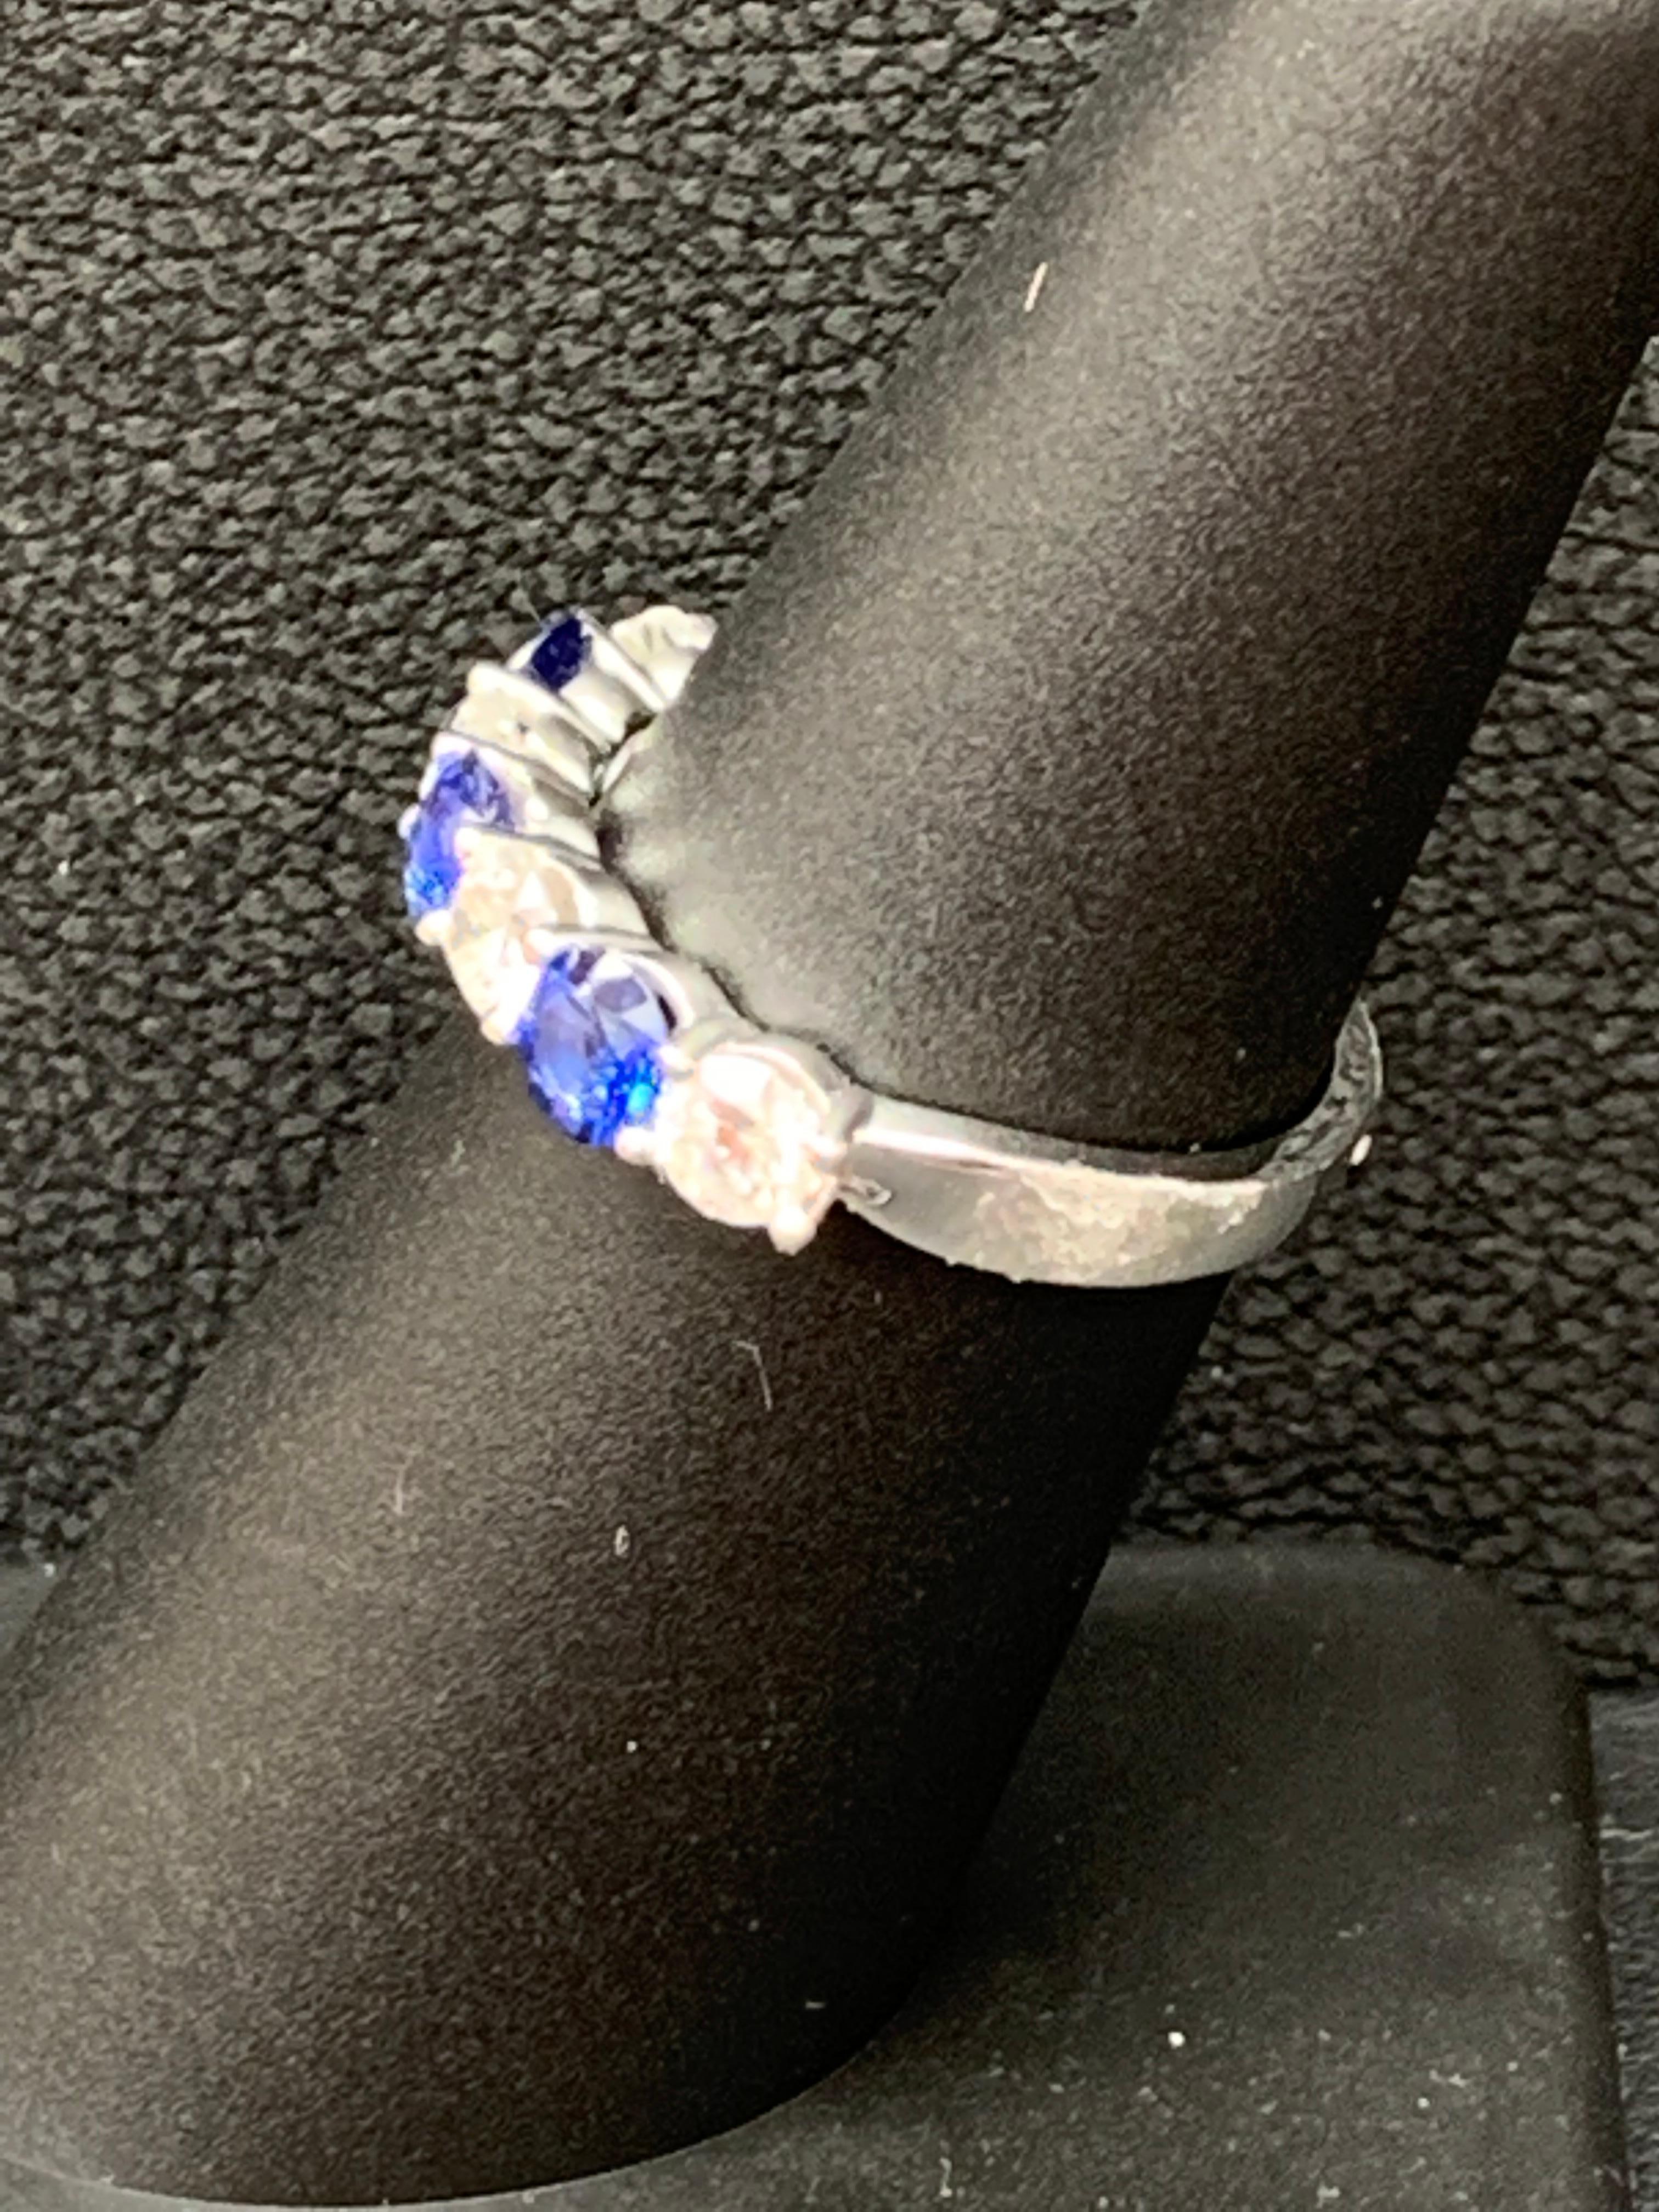 A fashionable and classic wedding band showcasing 3 color-rich blue sapphires weighing 0.83 carats total that alternate with 4 brilliant round diamonds weighing 0.75 carats total. Stones are secured with a shared prong setting made with 14 karats